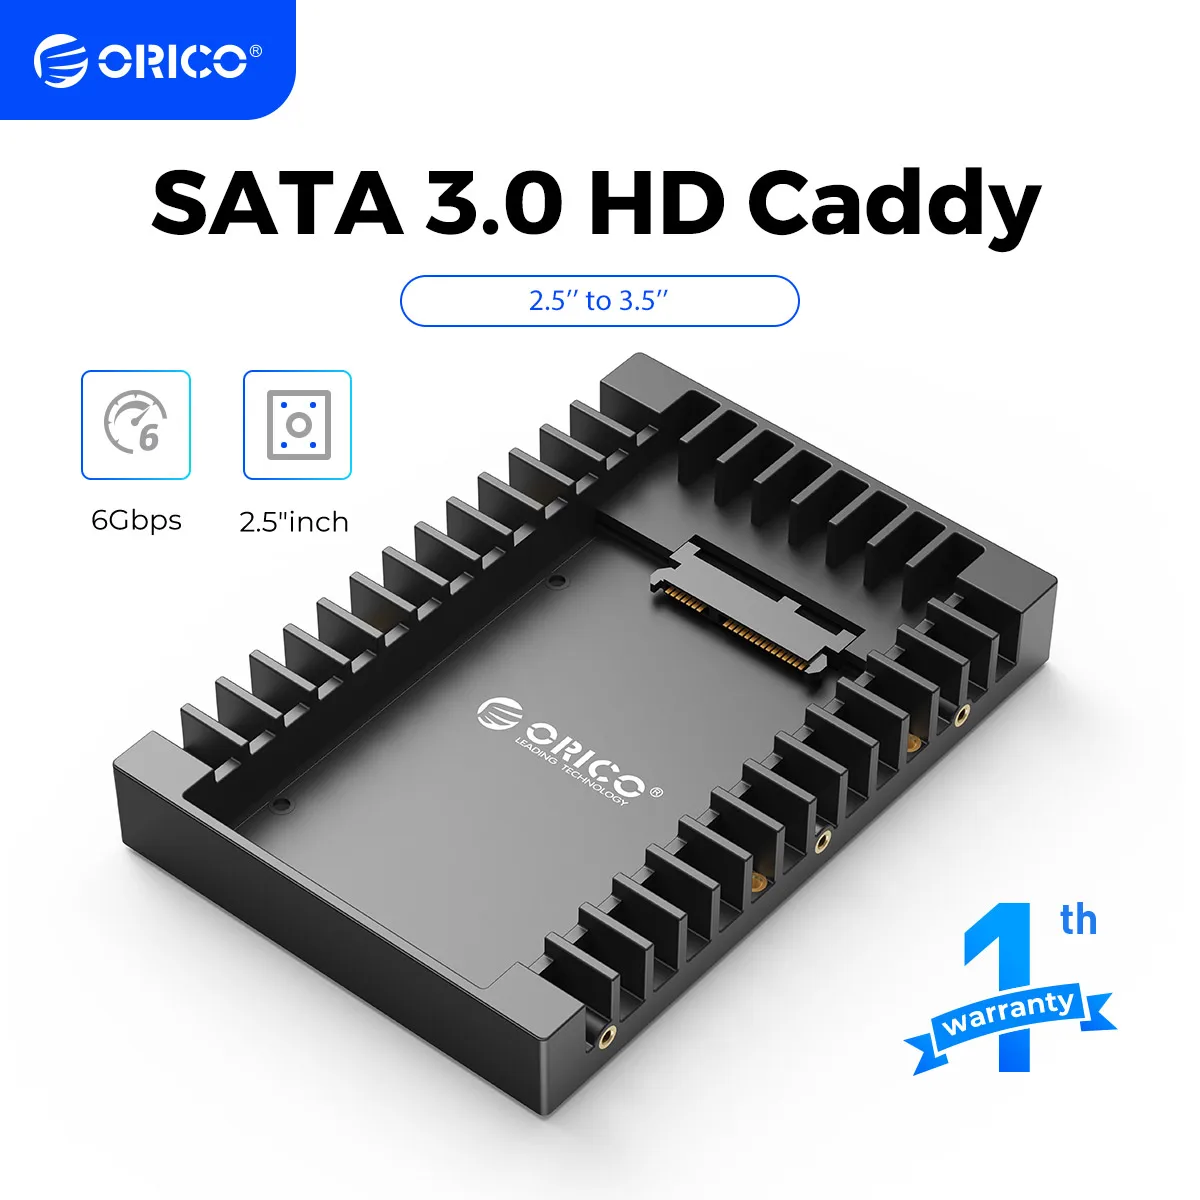 ORICO 2.5 to 3.5 inch Hard Drive Caddy Support SATA 3.0 6Gbps Fast Transfer Speed Not Including Hard Drive orico 2569s3 v2 2 5 inch usb3 0 hard drive enclosure sata to usb3 0 micro b hard drive disk box support 5gbps uasp tool free